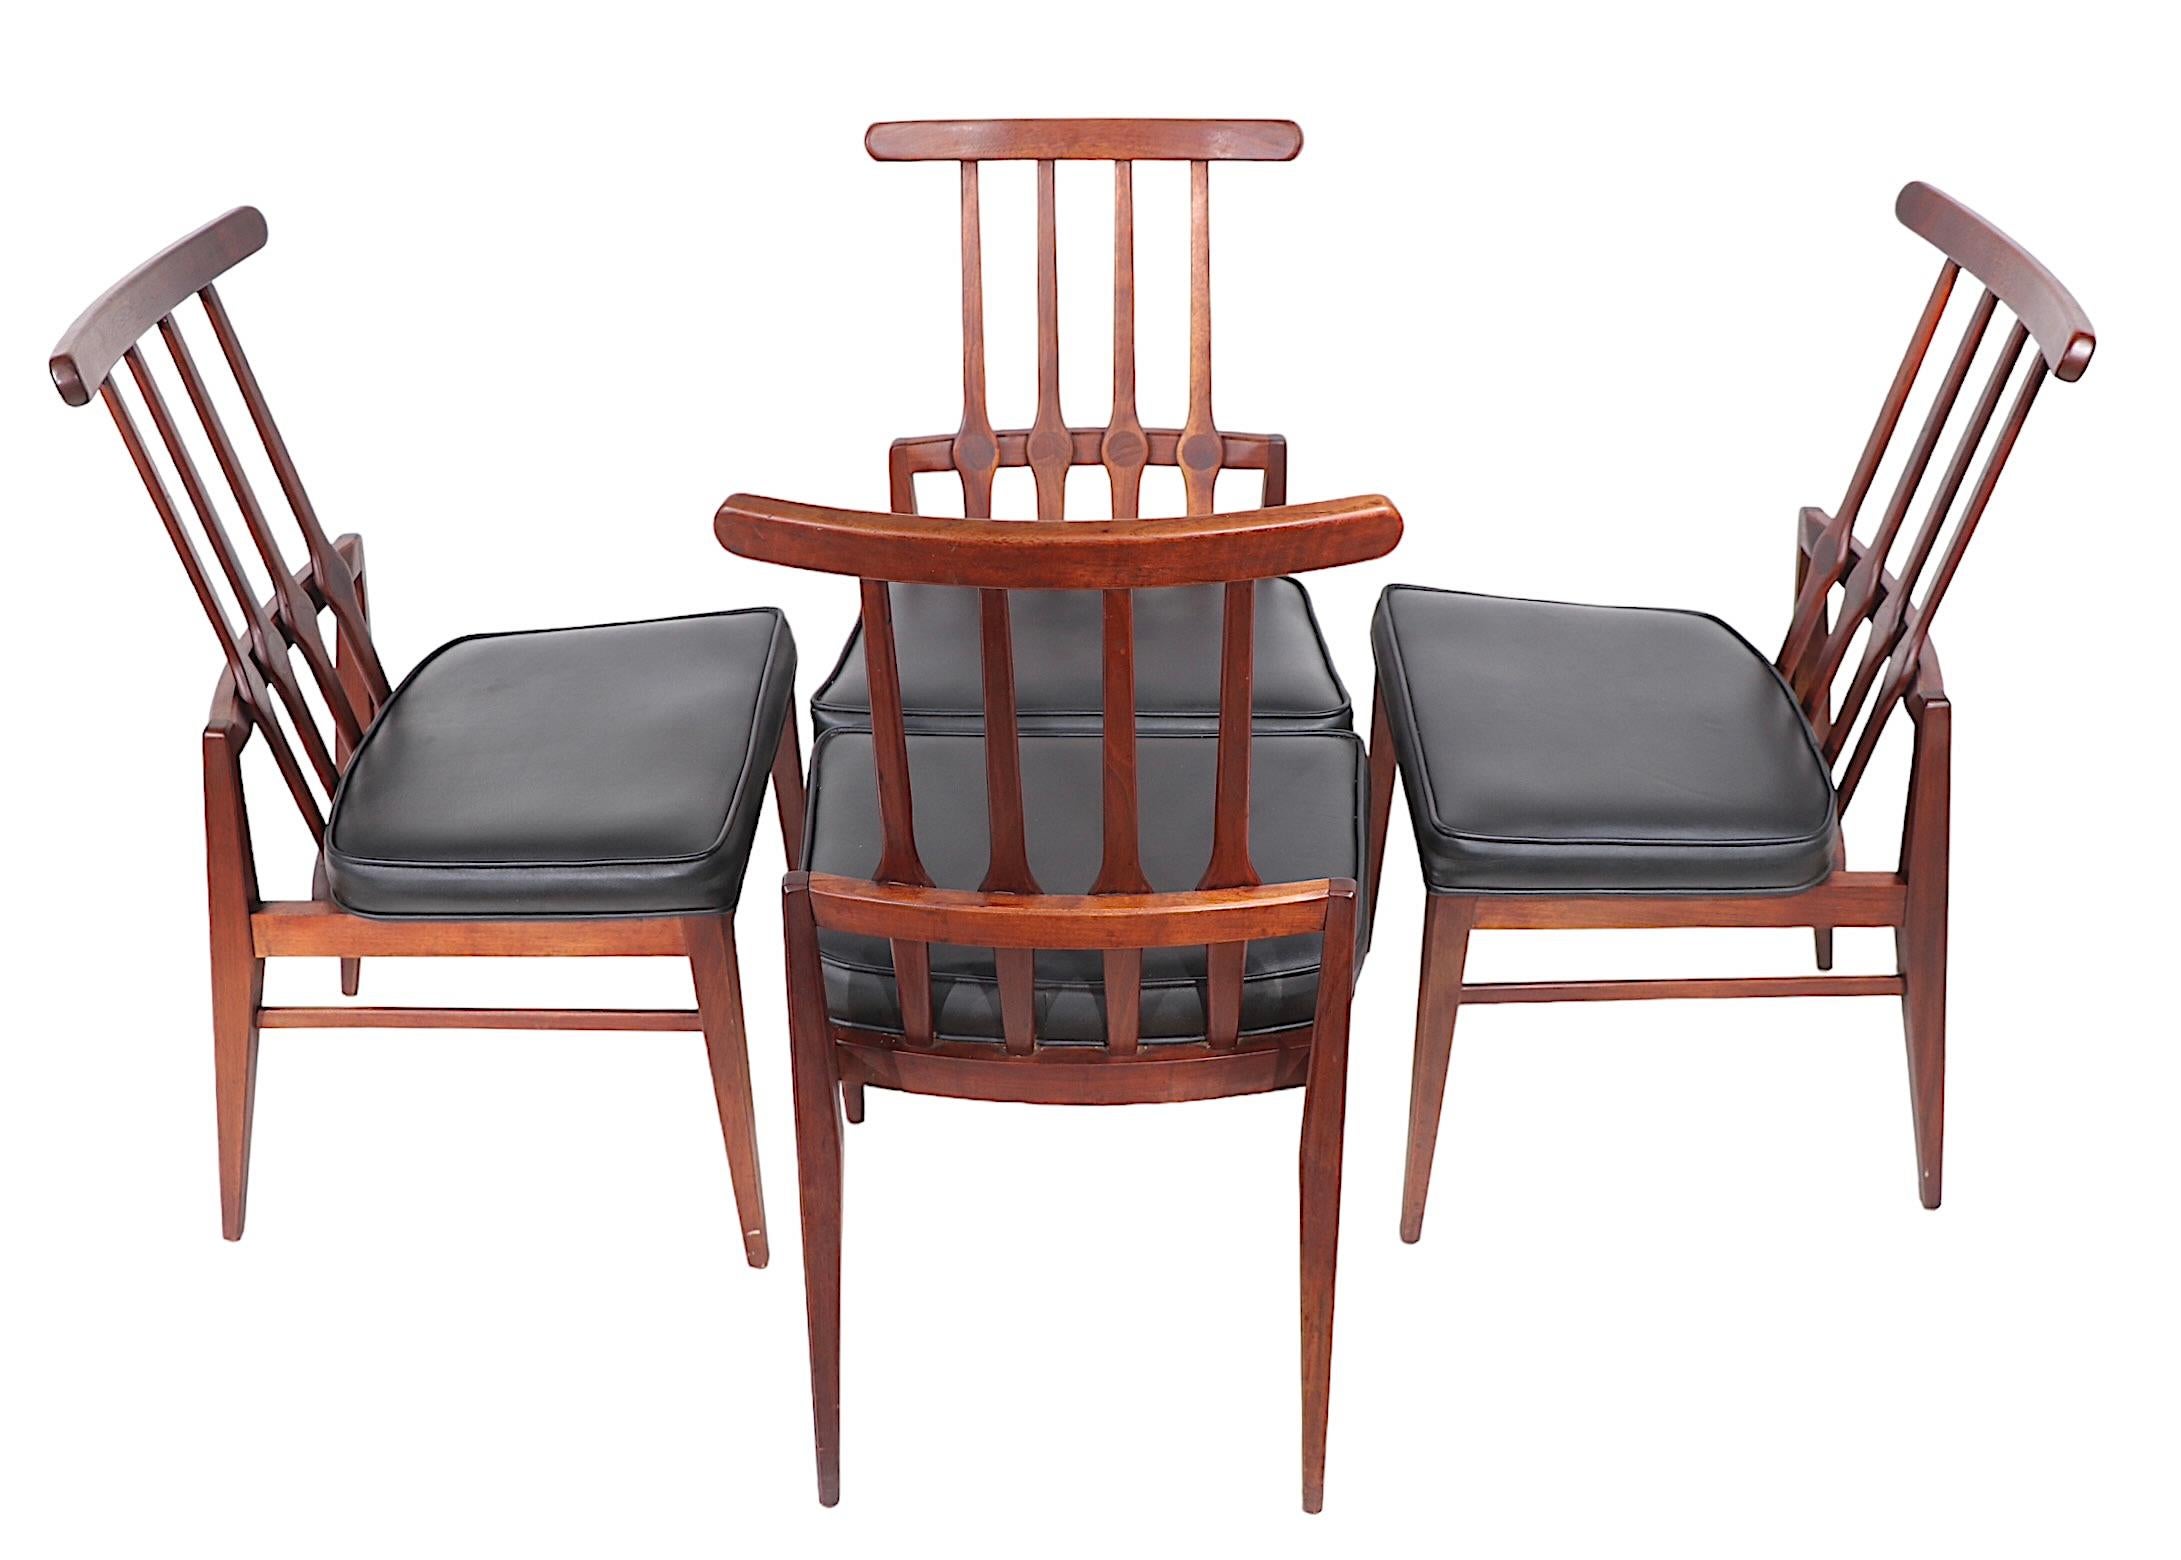 Set of Four Mid Century Dining Chairs by Foster - McDavid c 1950/1960's  For Sale 11